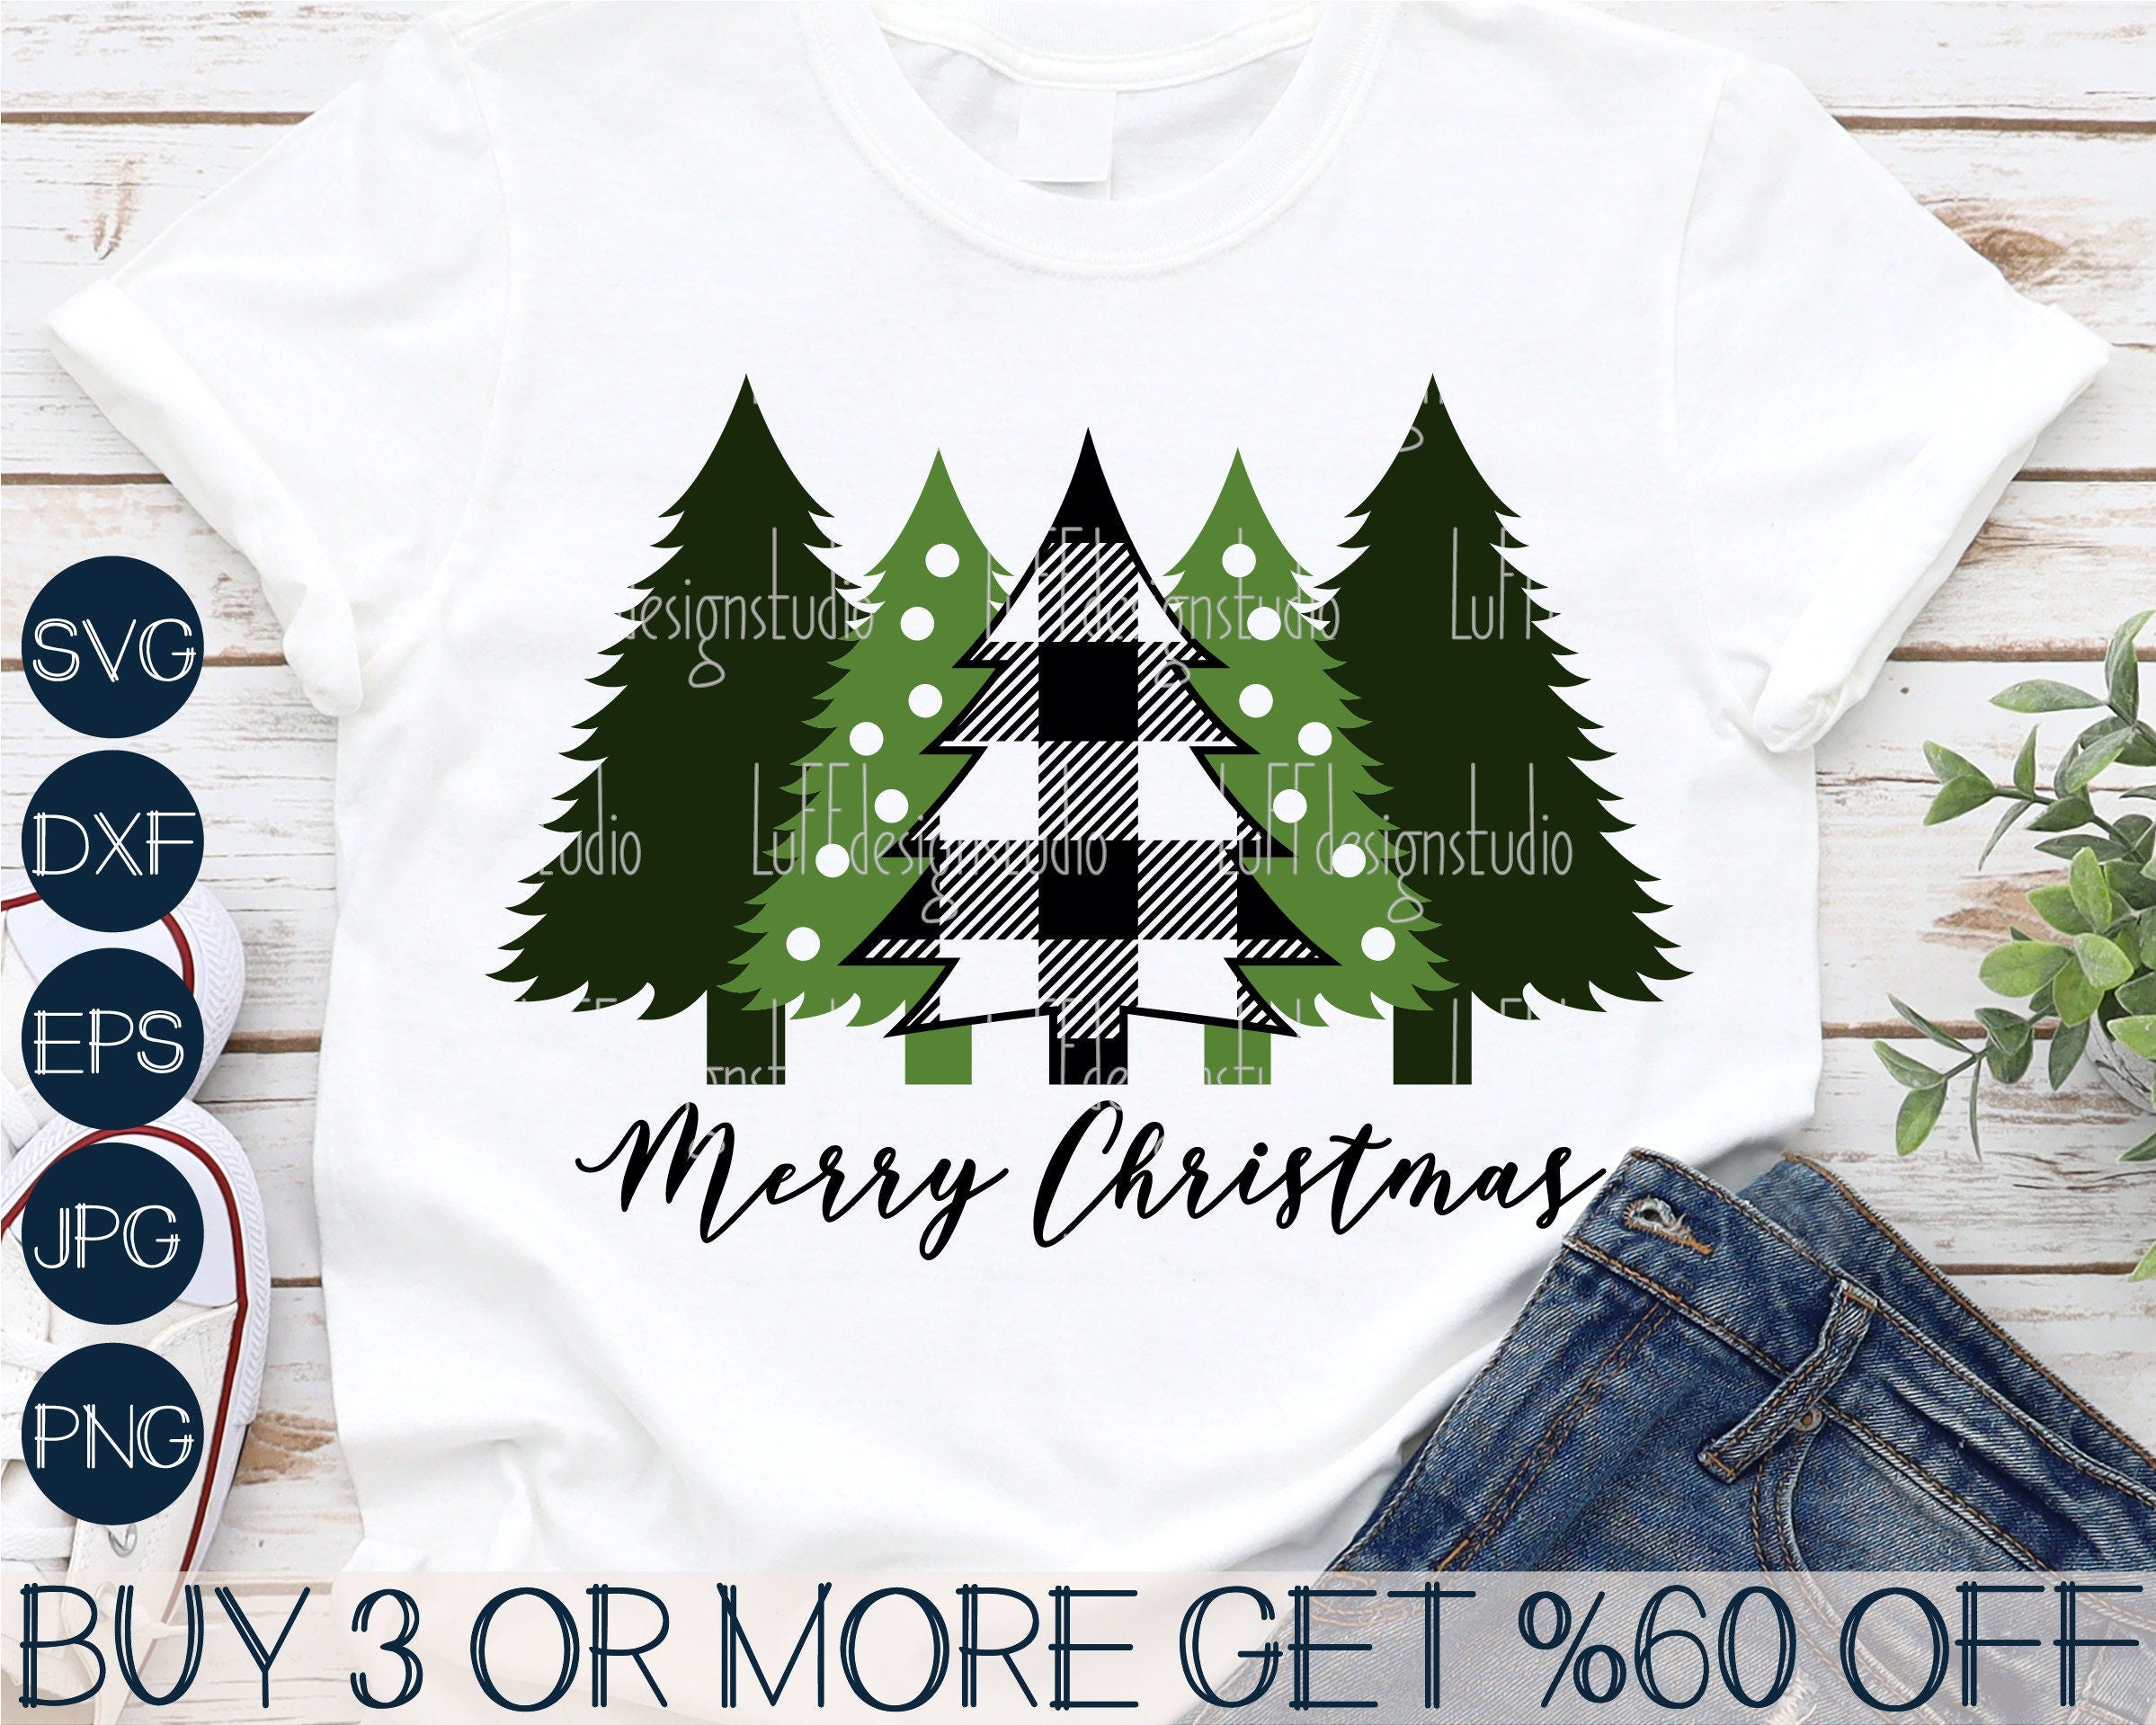 Christmas Tree SVG, Merry Christmas SVG, Buffalo Plaid, Pine Tree, Dxf, Png, Svg Files For Cricut, Silhouette, Sublimation Designs Downloads